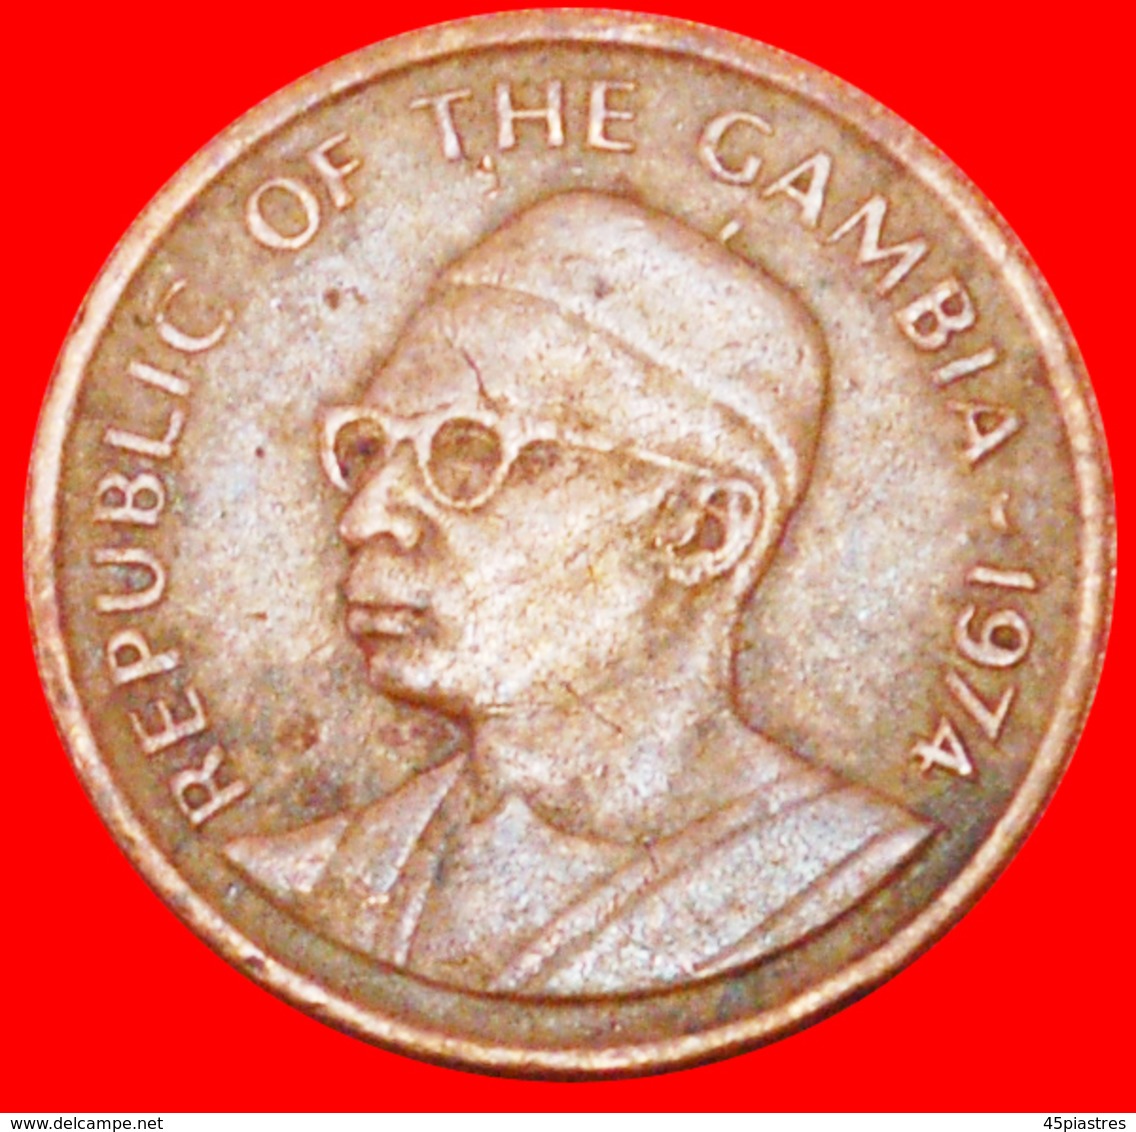 # PEANUTS: THE GAMBIA ★ 1 BUTUT 1974! LOW START ★ NO RESERVE! - Gambie